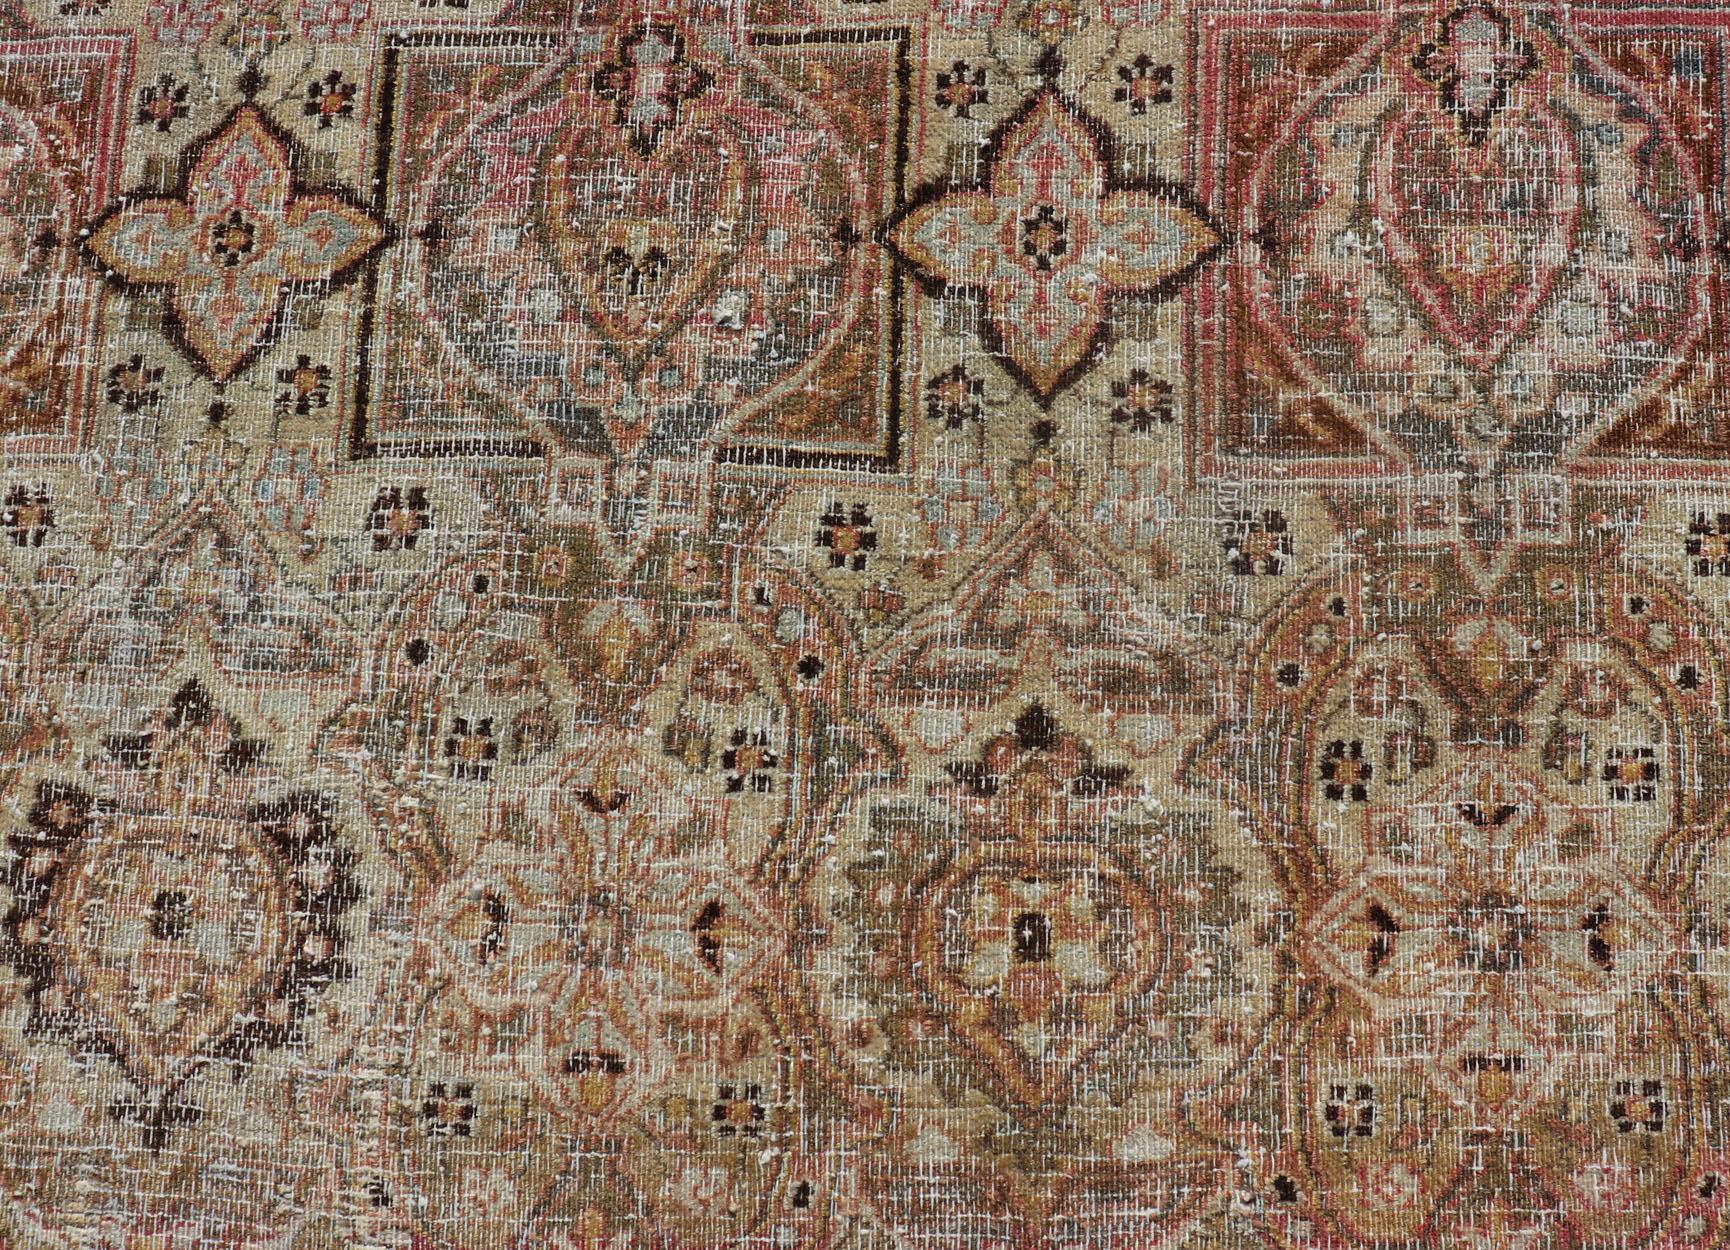  Antique Persian Khorassan Rug with Palmettes, Geometric Flowers in Soft Tones For Sale 6